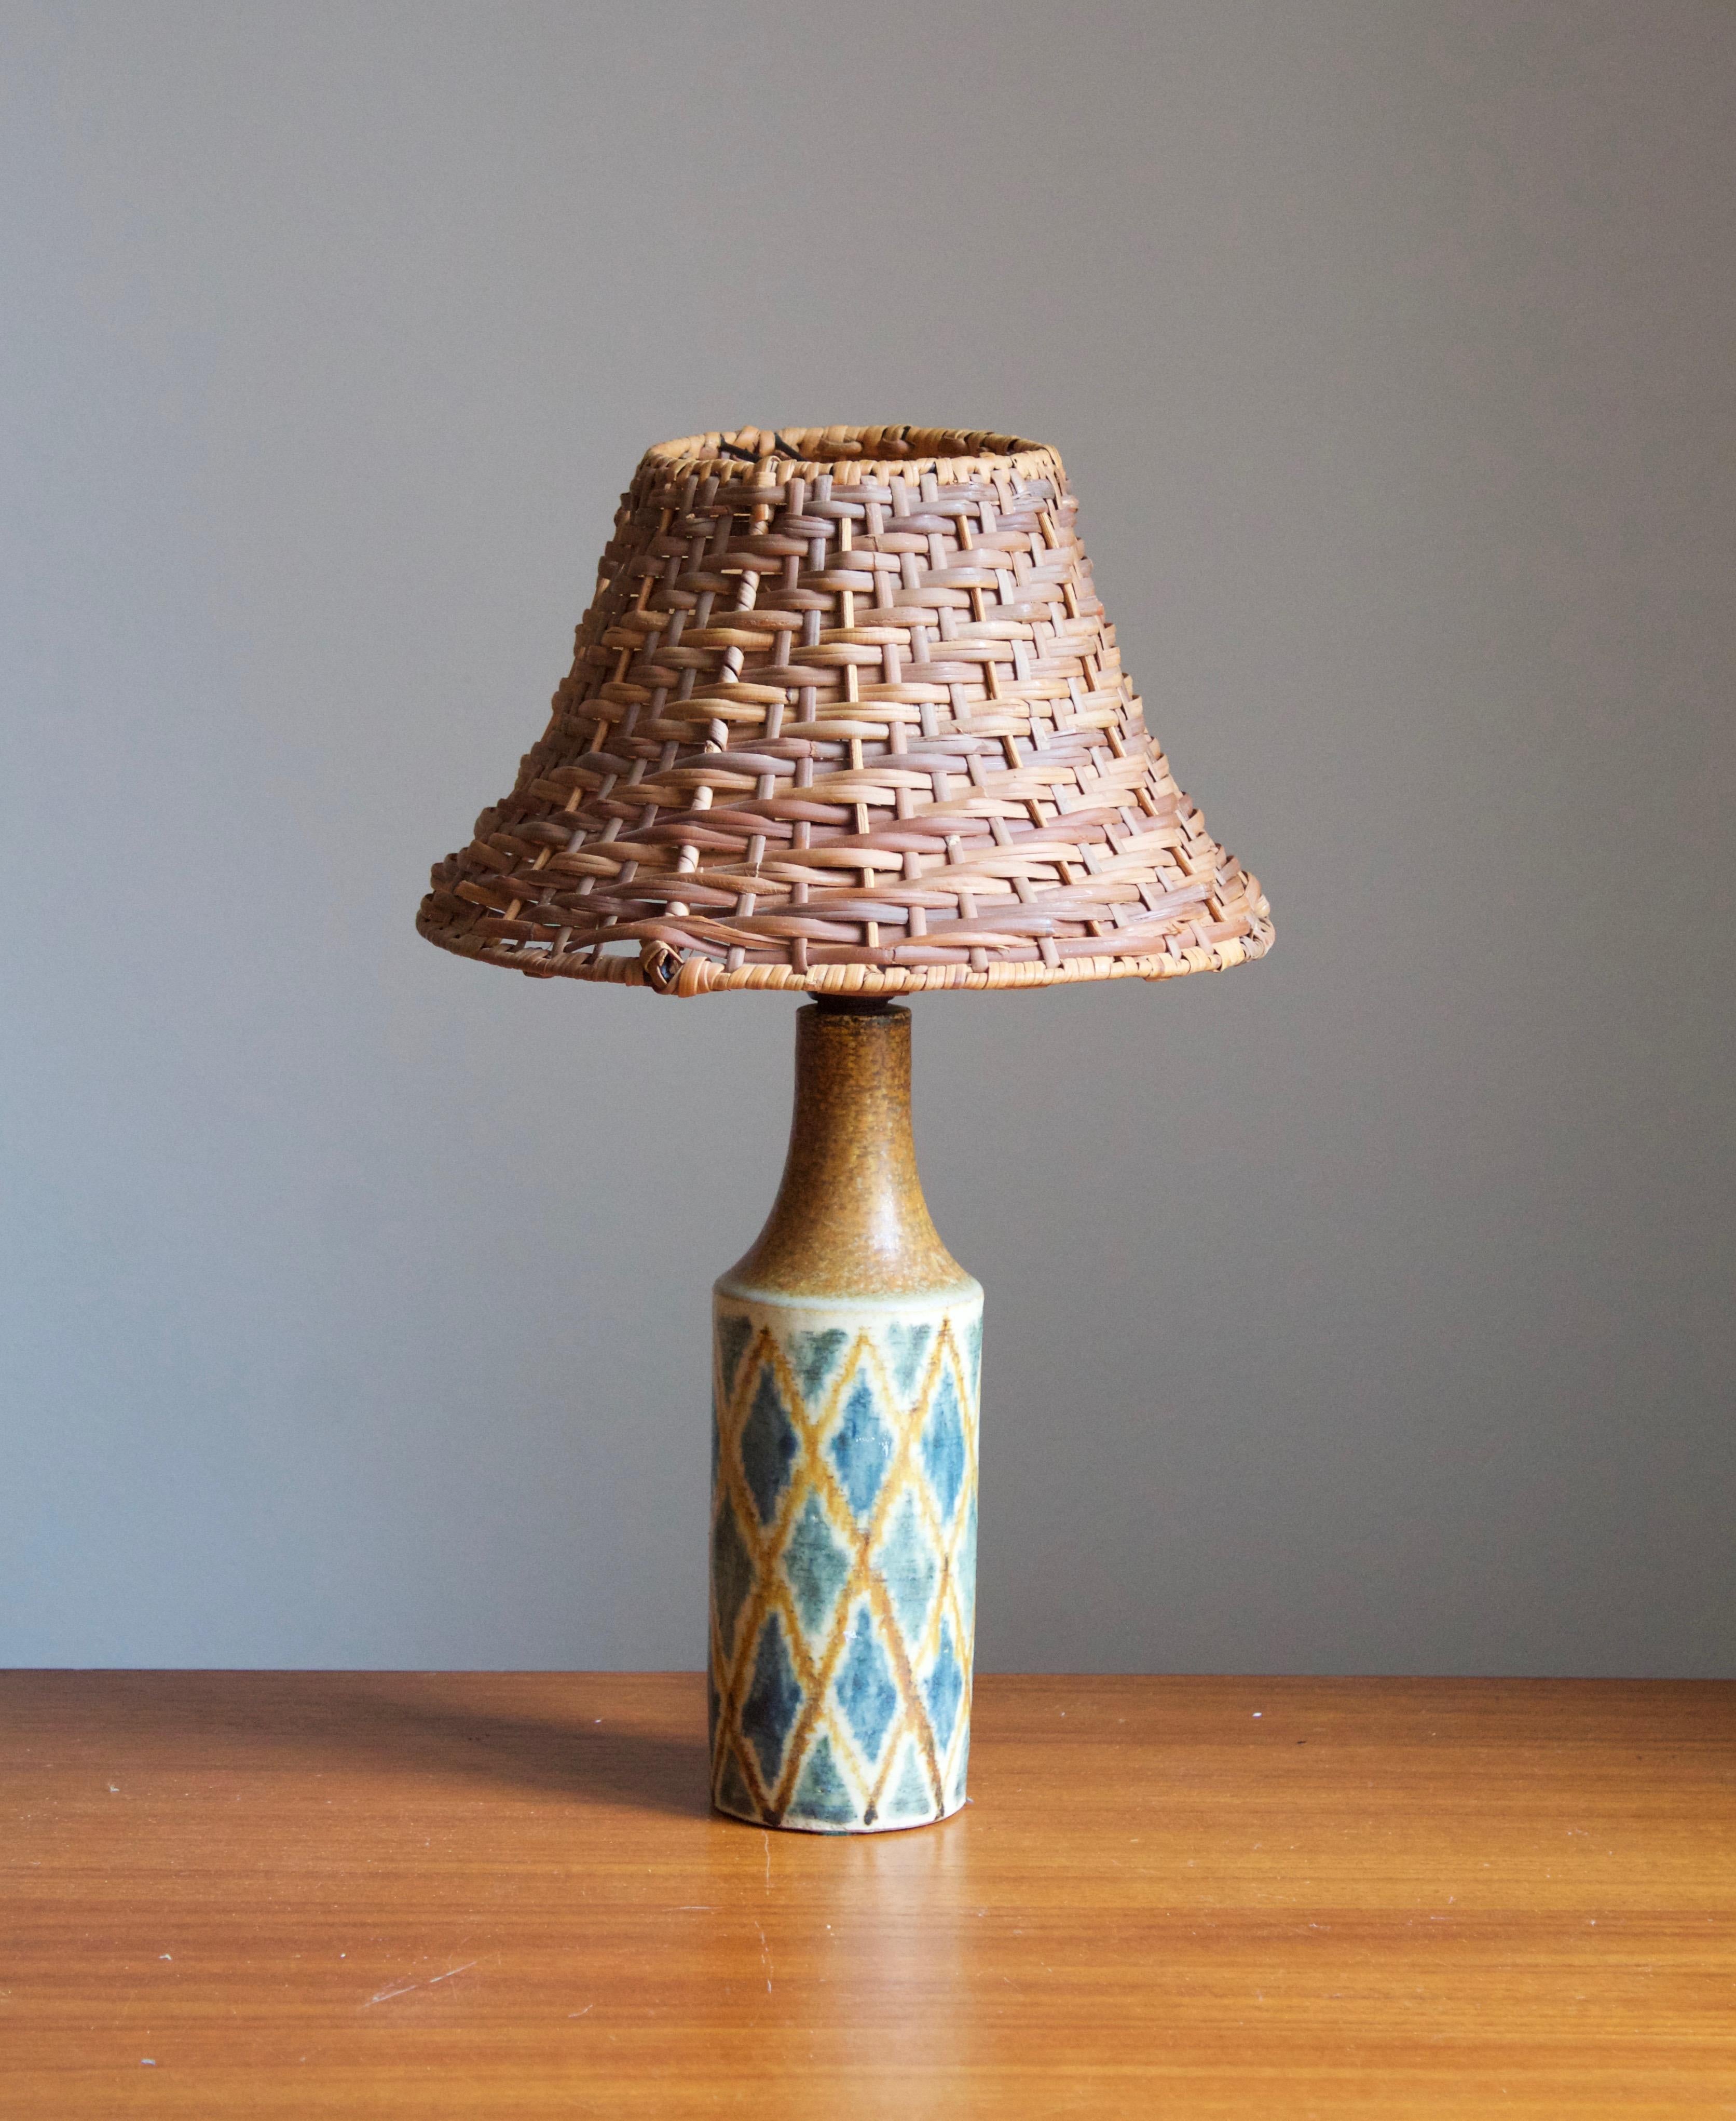 A small table lamp, designed and produced in Denmark, c. 1950s. Stamped.

Stated dimensions exclude lampshade, height includes socket. Illustrated rattan lampshade can be included upon request.